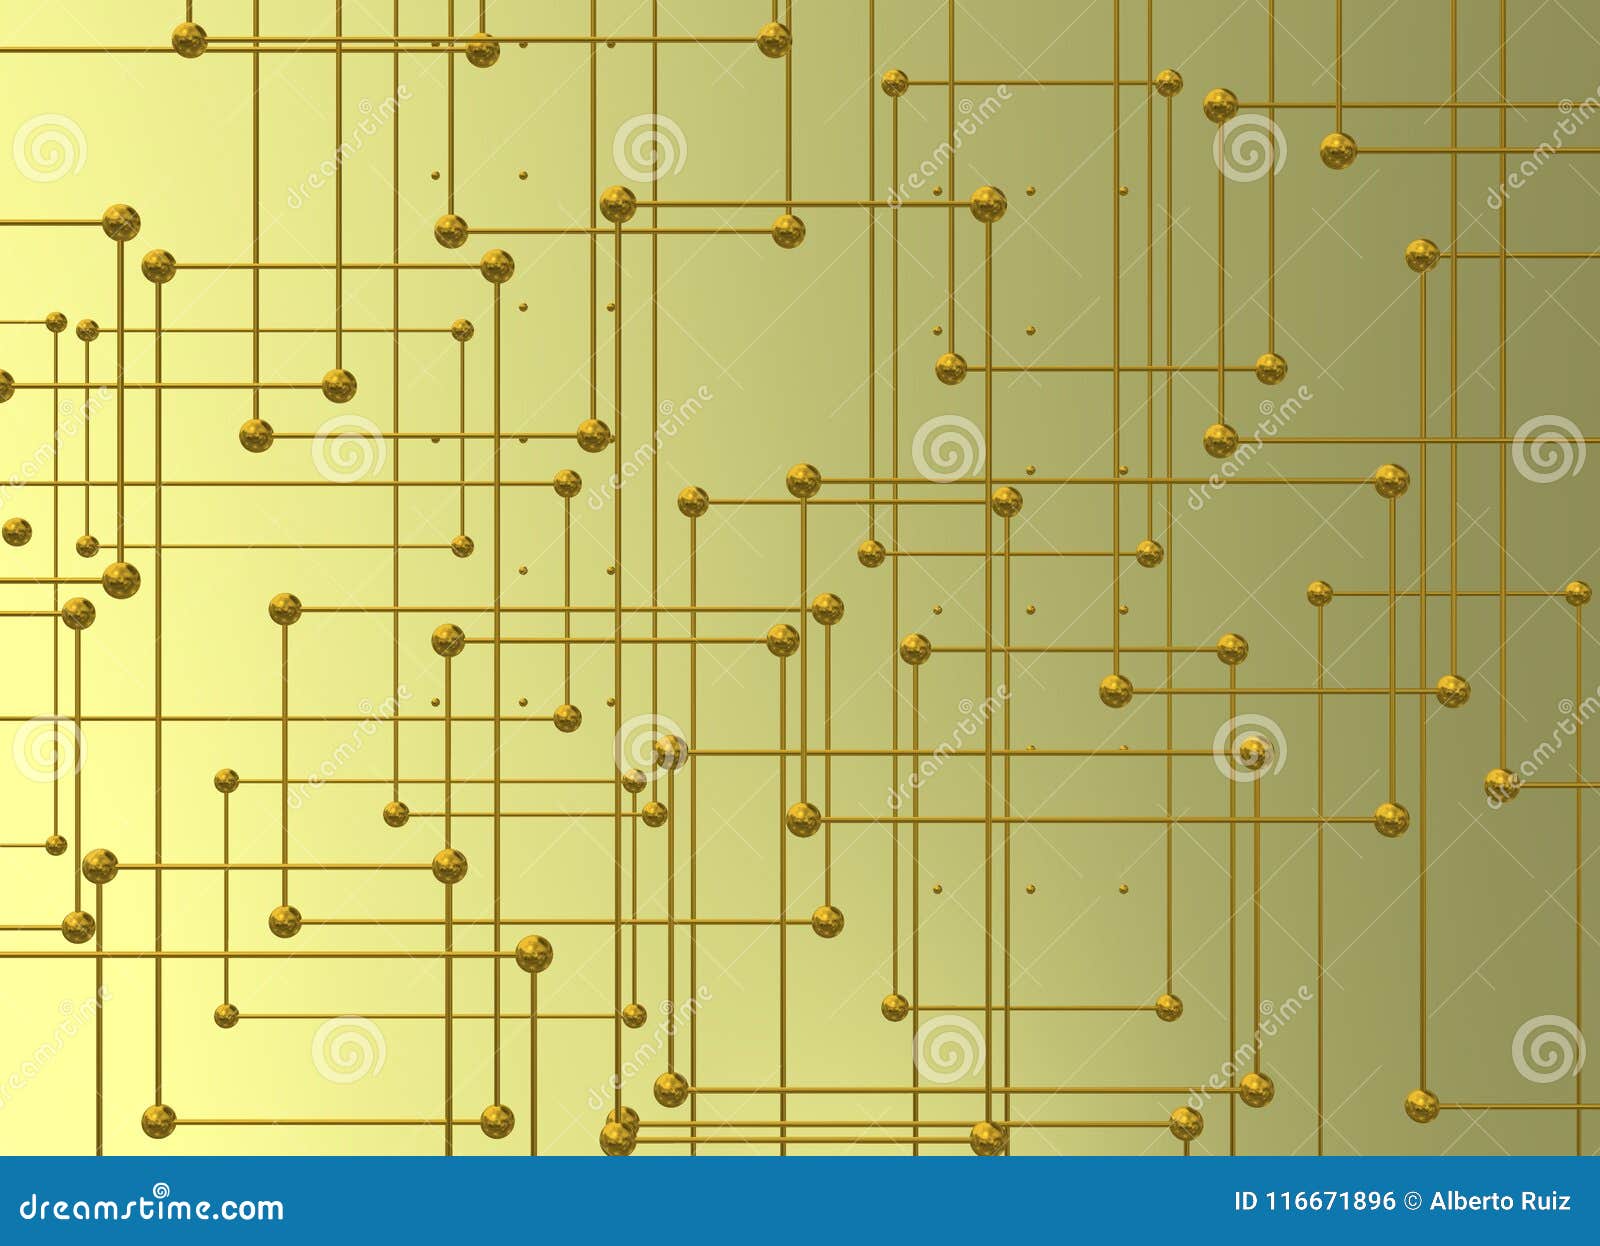 interconnections with golden balls over bright background.